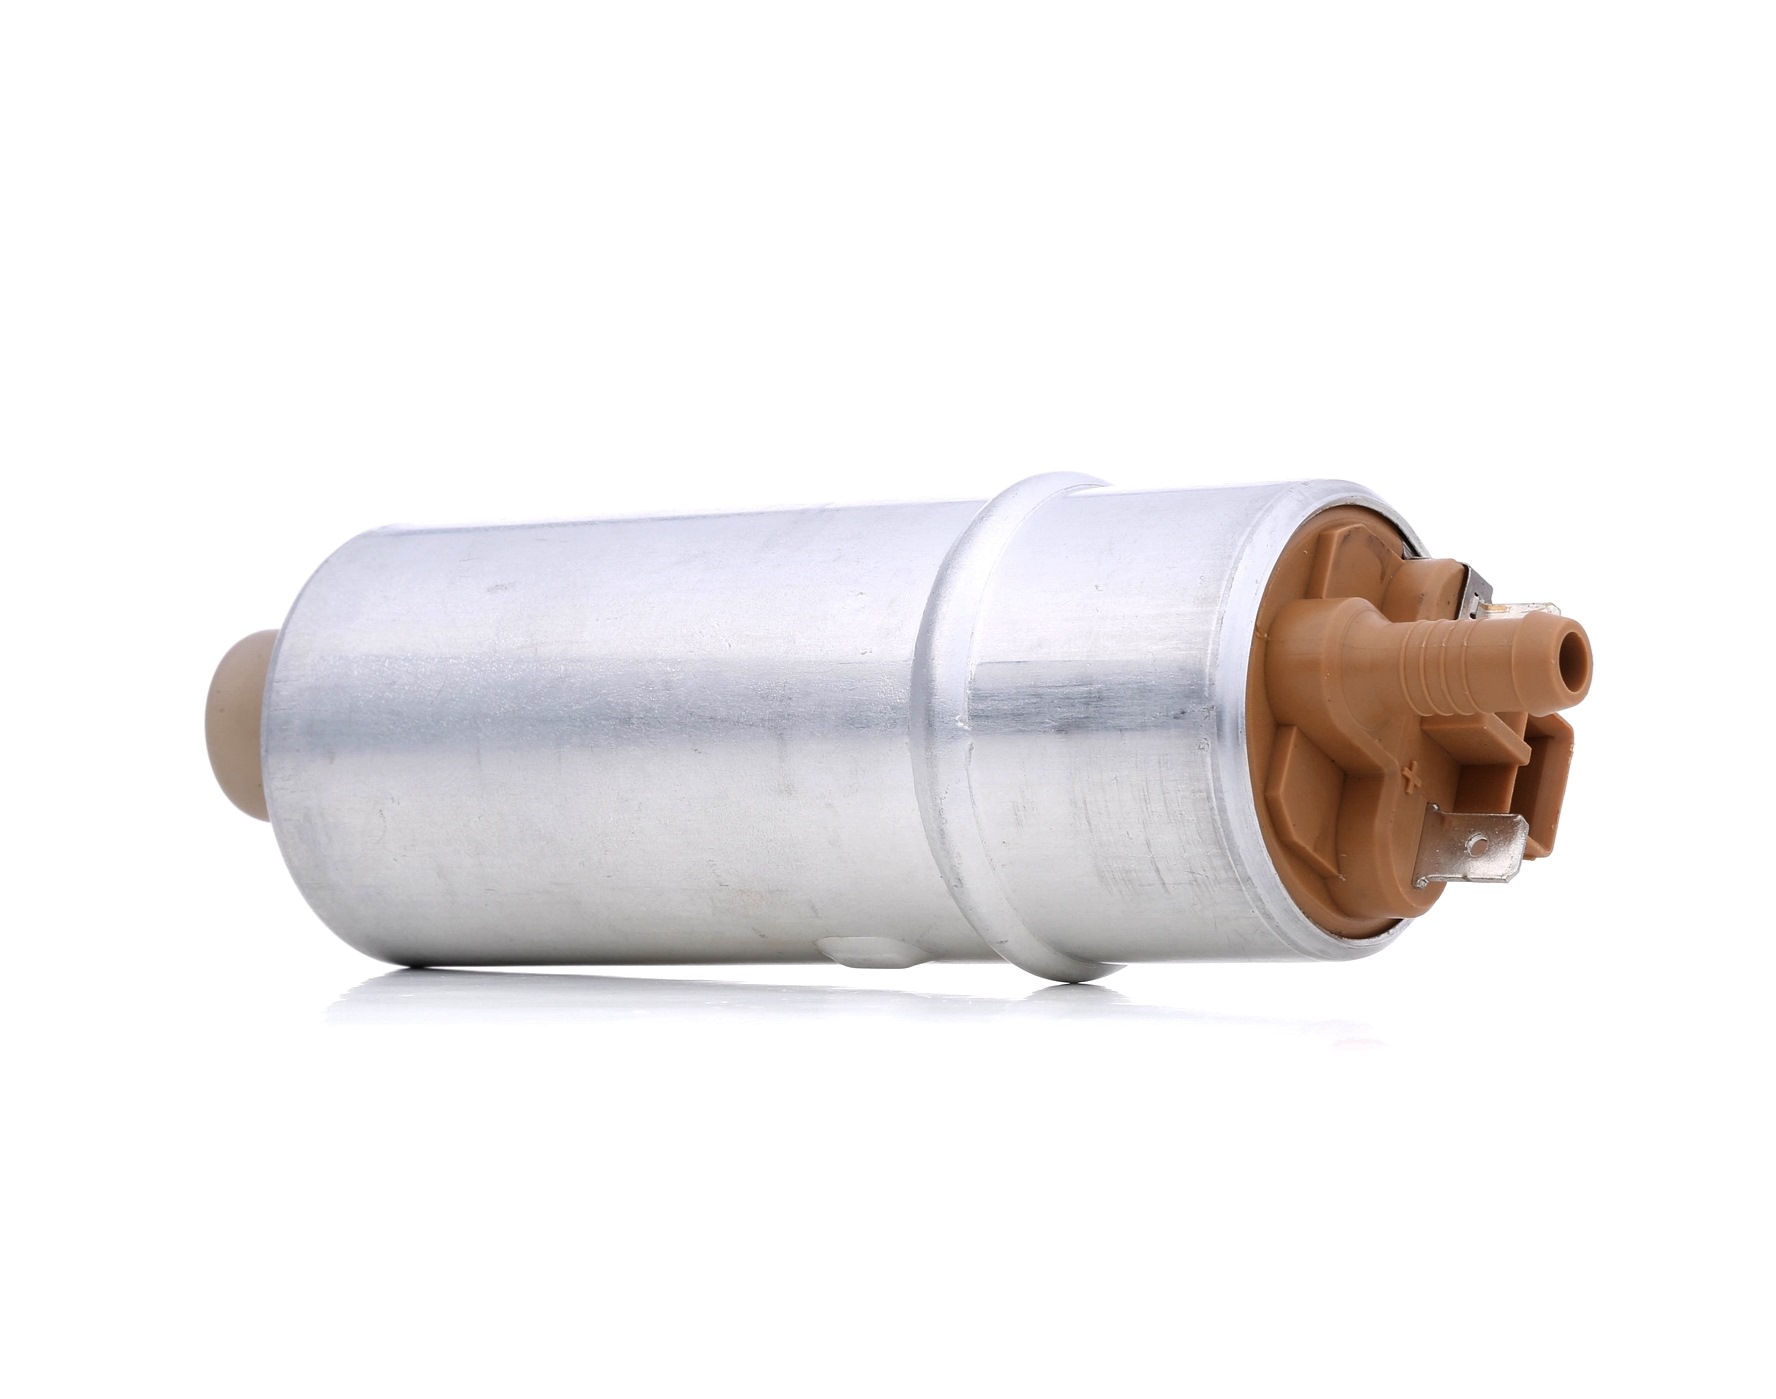 STARK SKFP-0160049 Fuel pump Electric, with attachment material, with connector parts, with fastening material